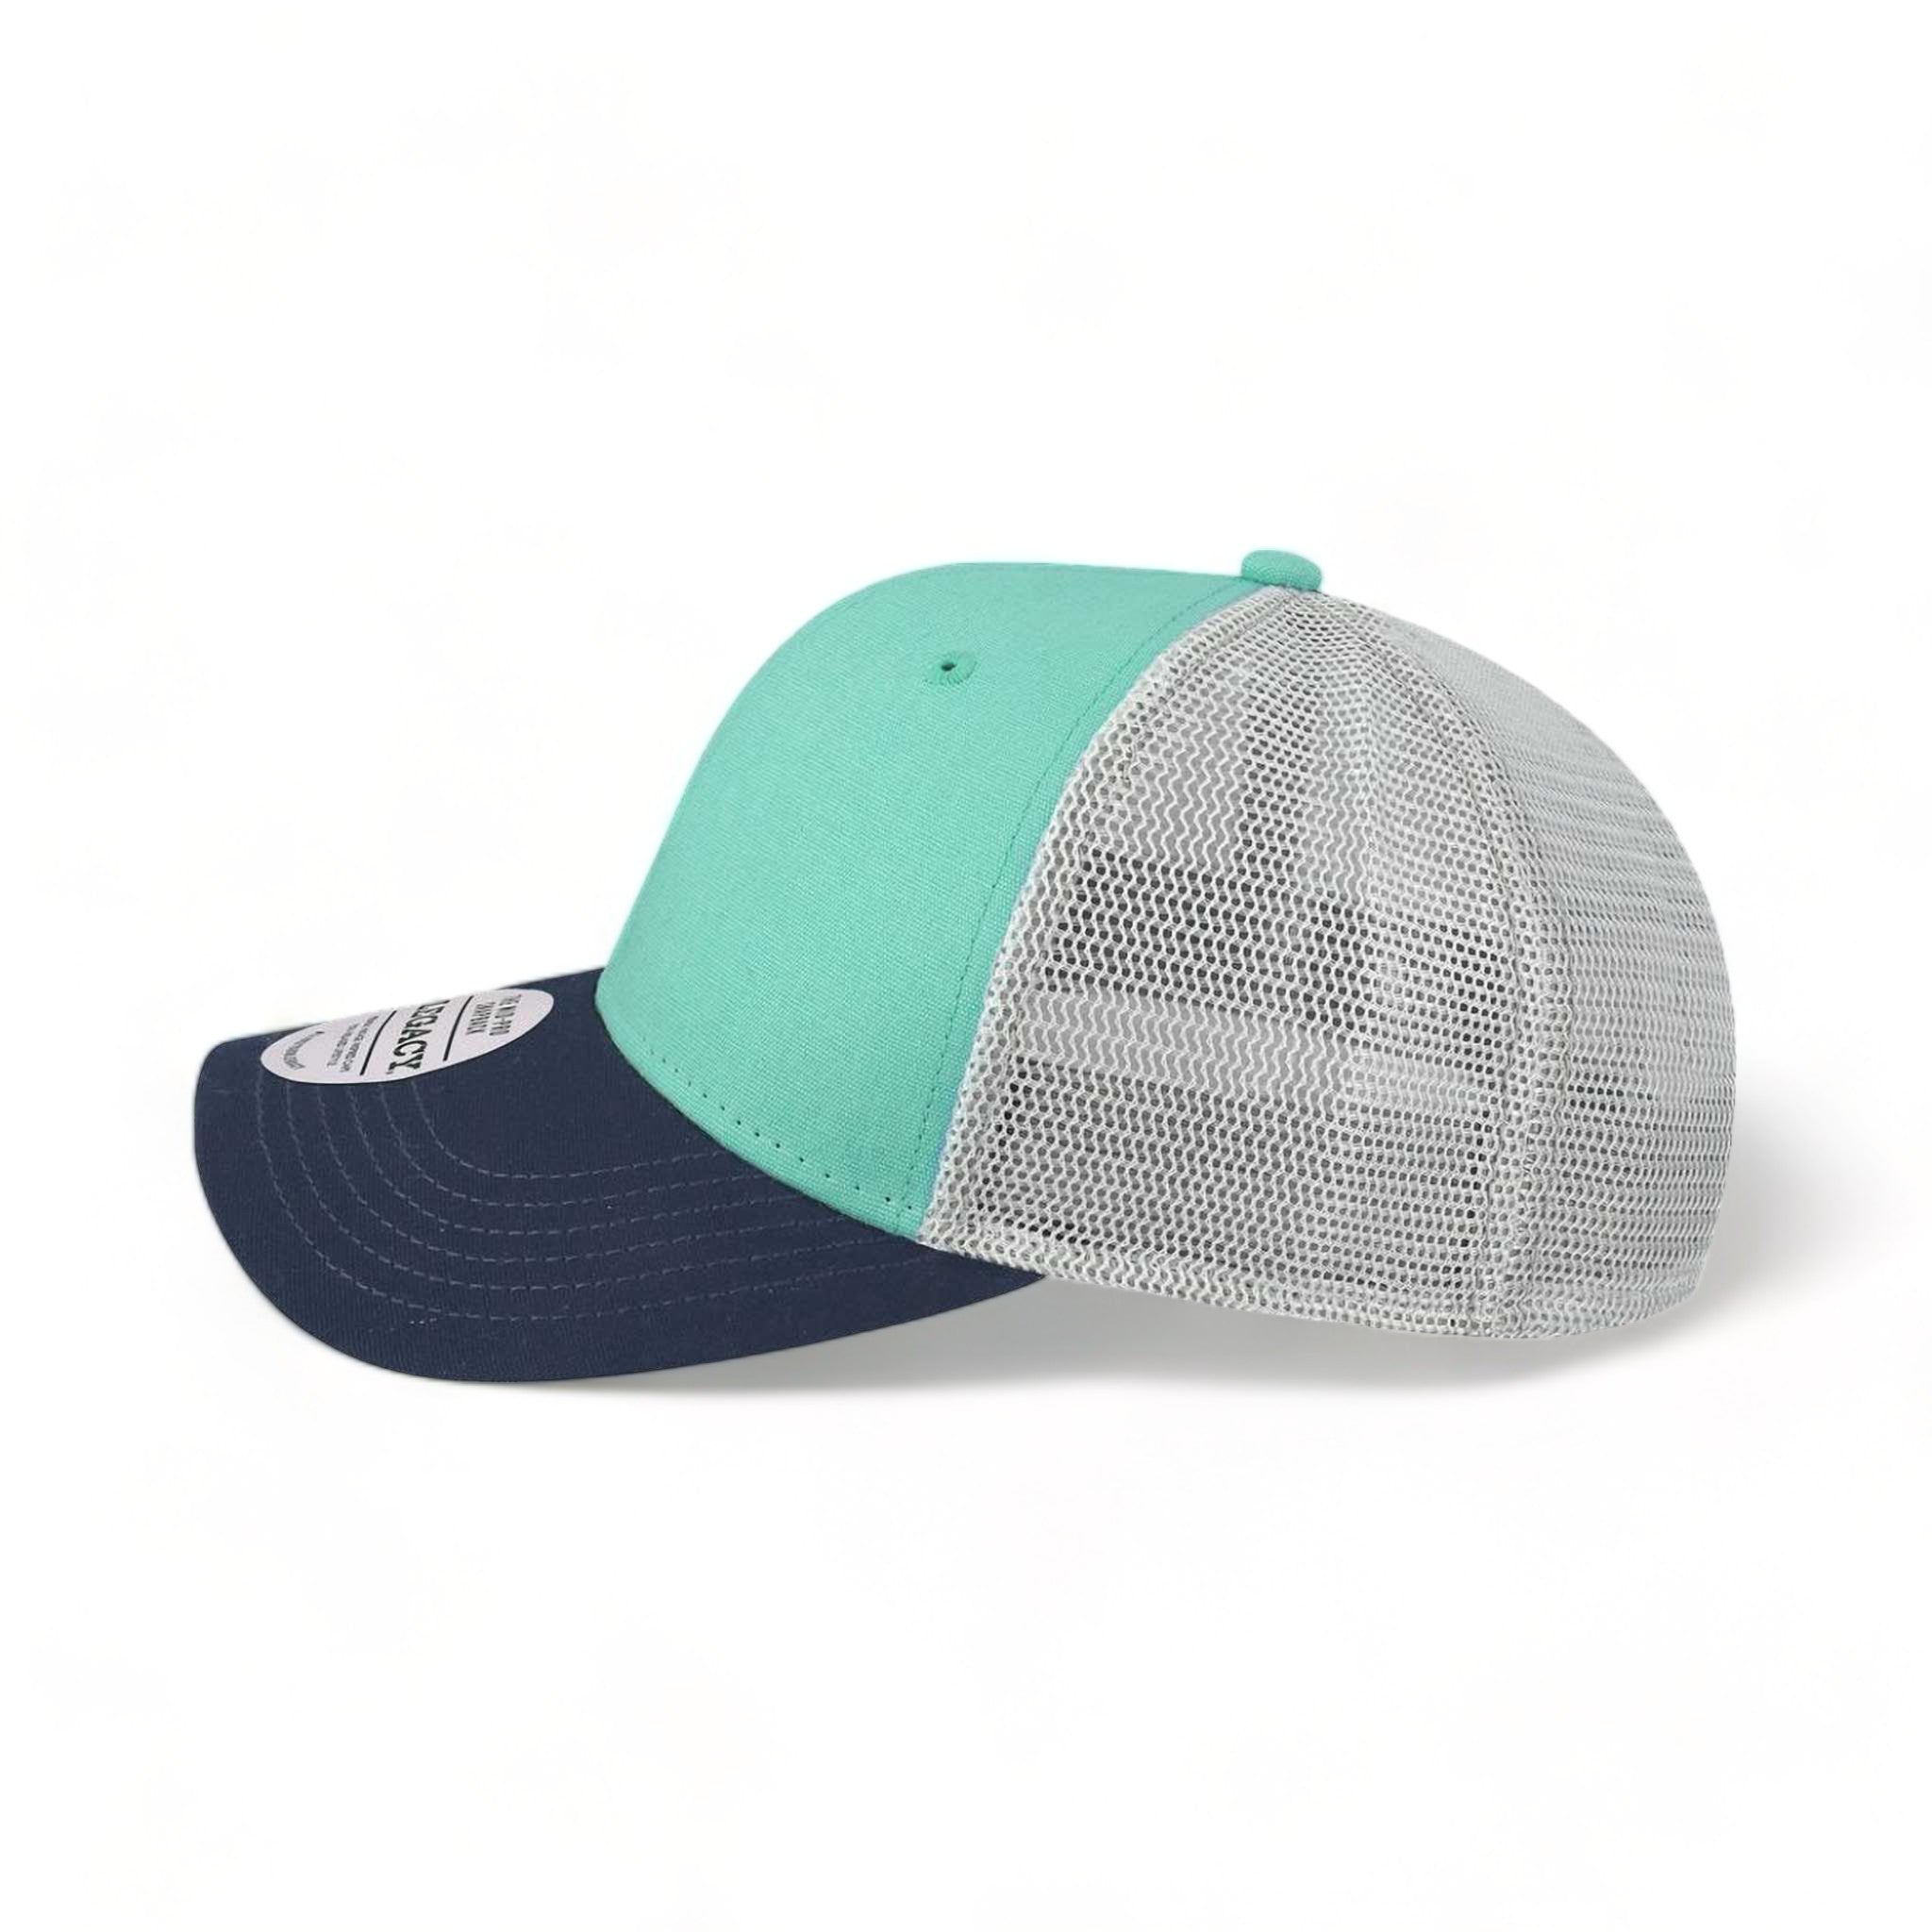 Side view of LEGACY MPS custom hat in mint, navy and silver